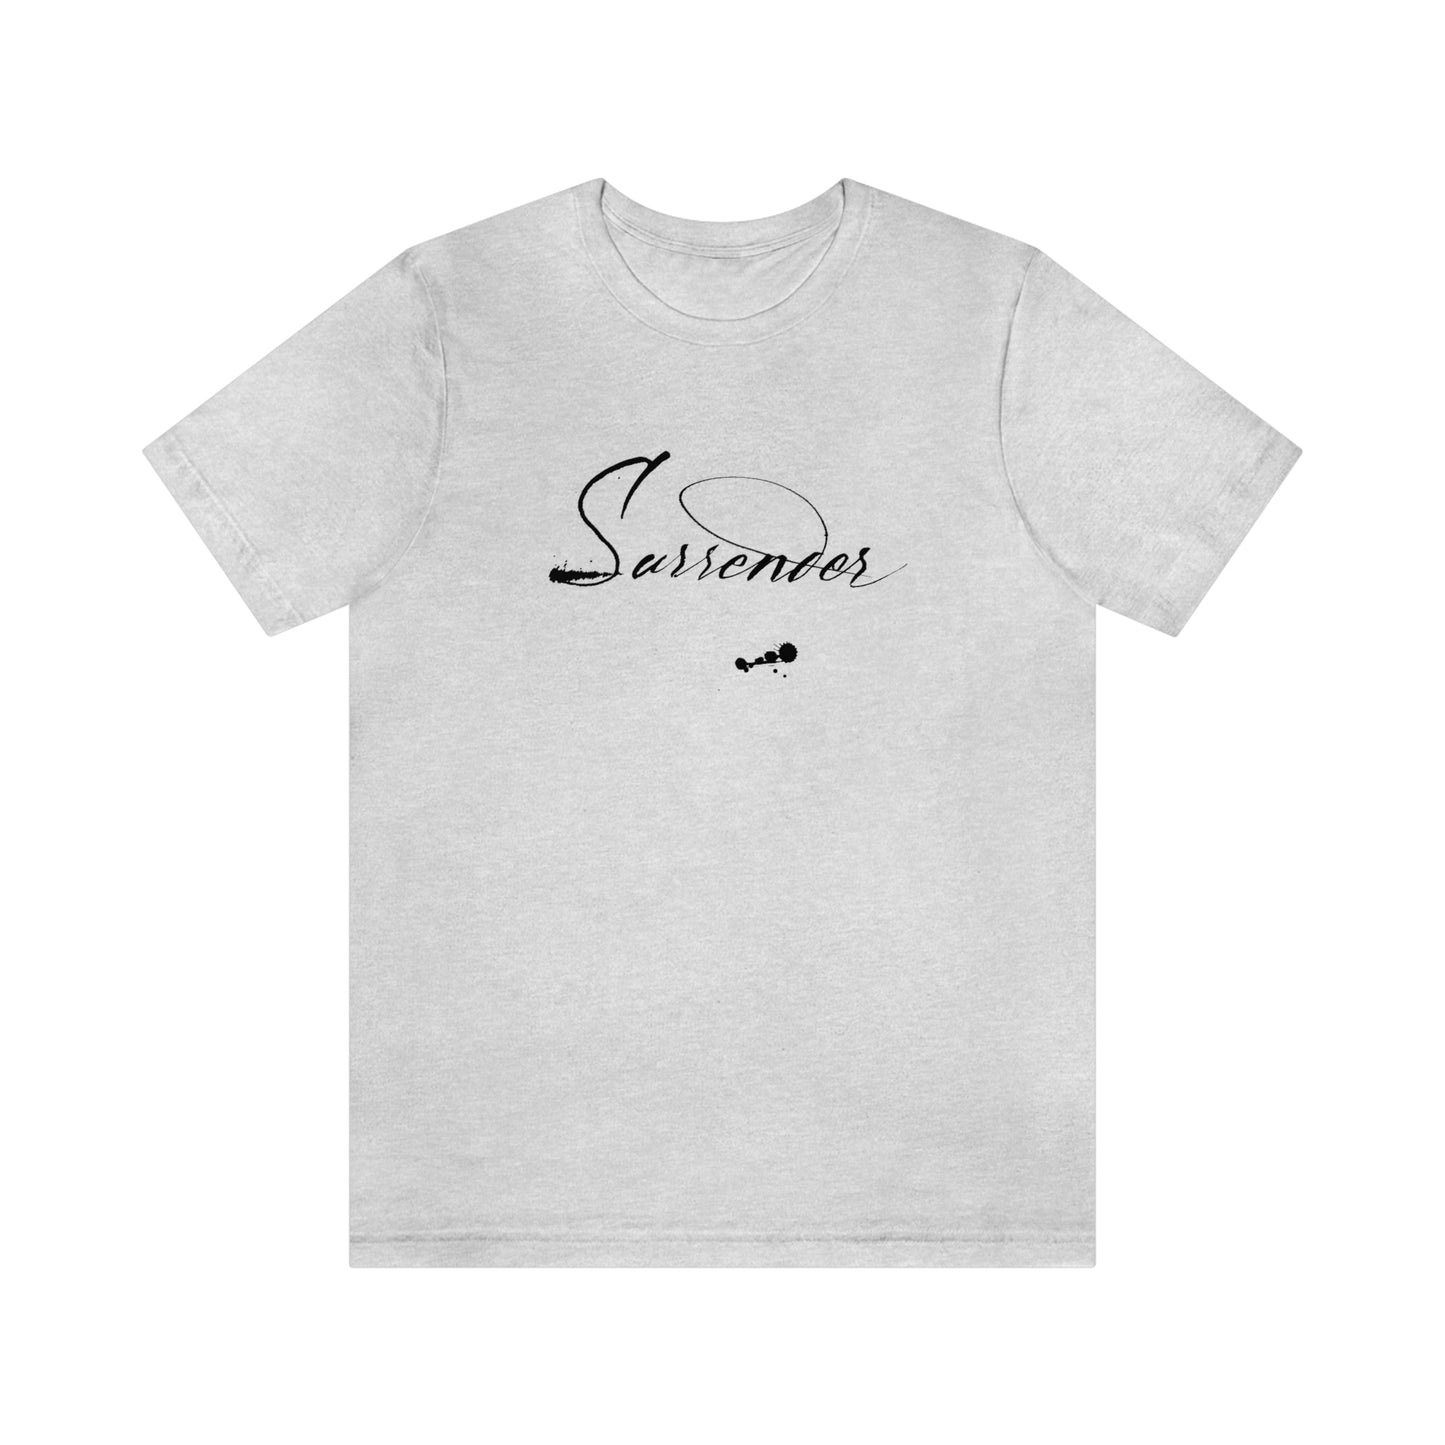 "Surrender" Mixed Messages Unisex Tee